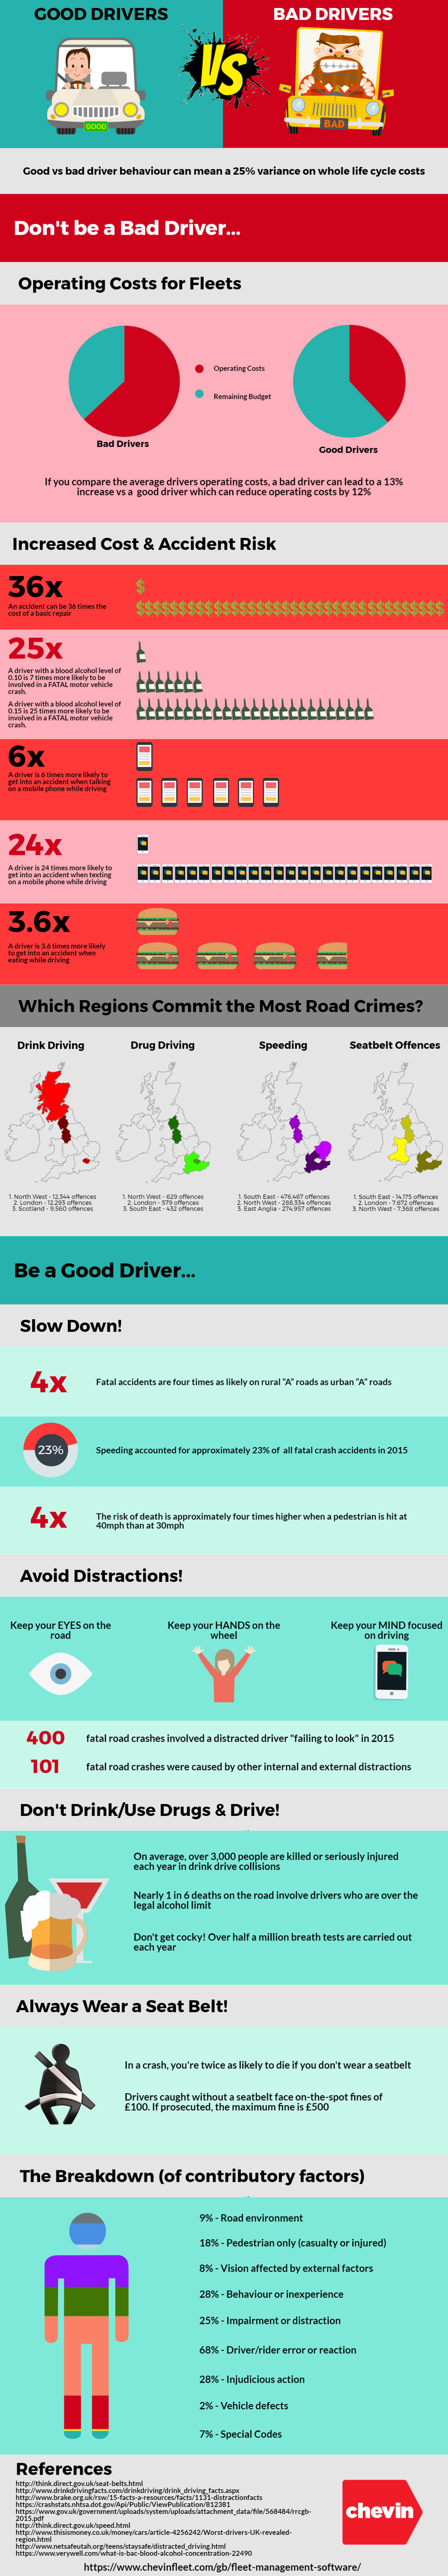 how to be a good driver infographic